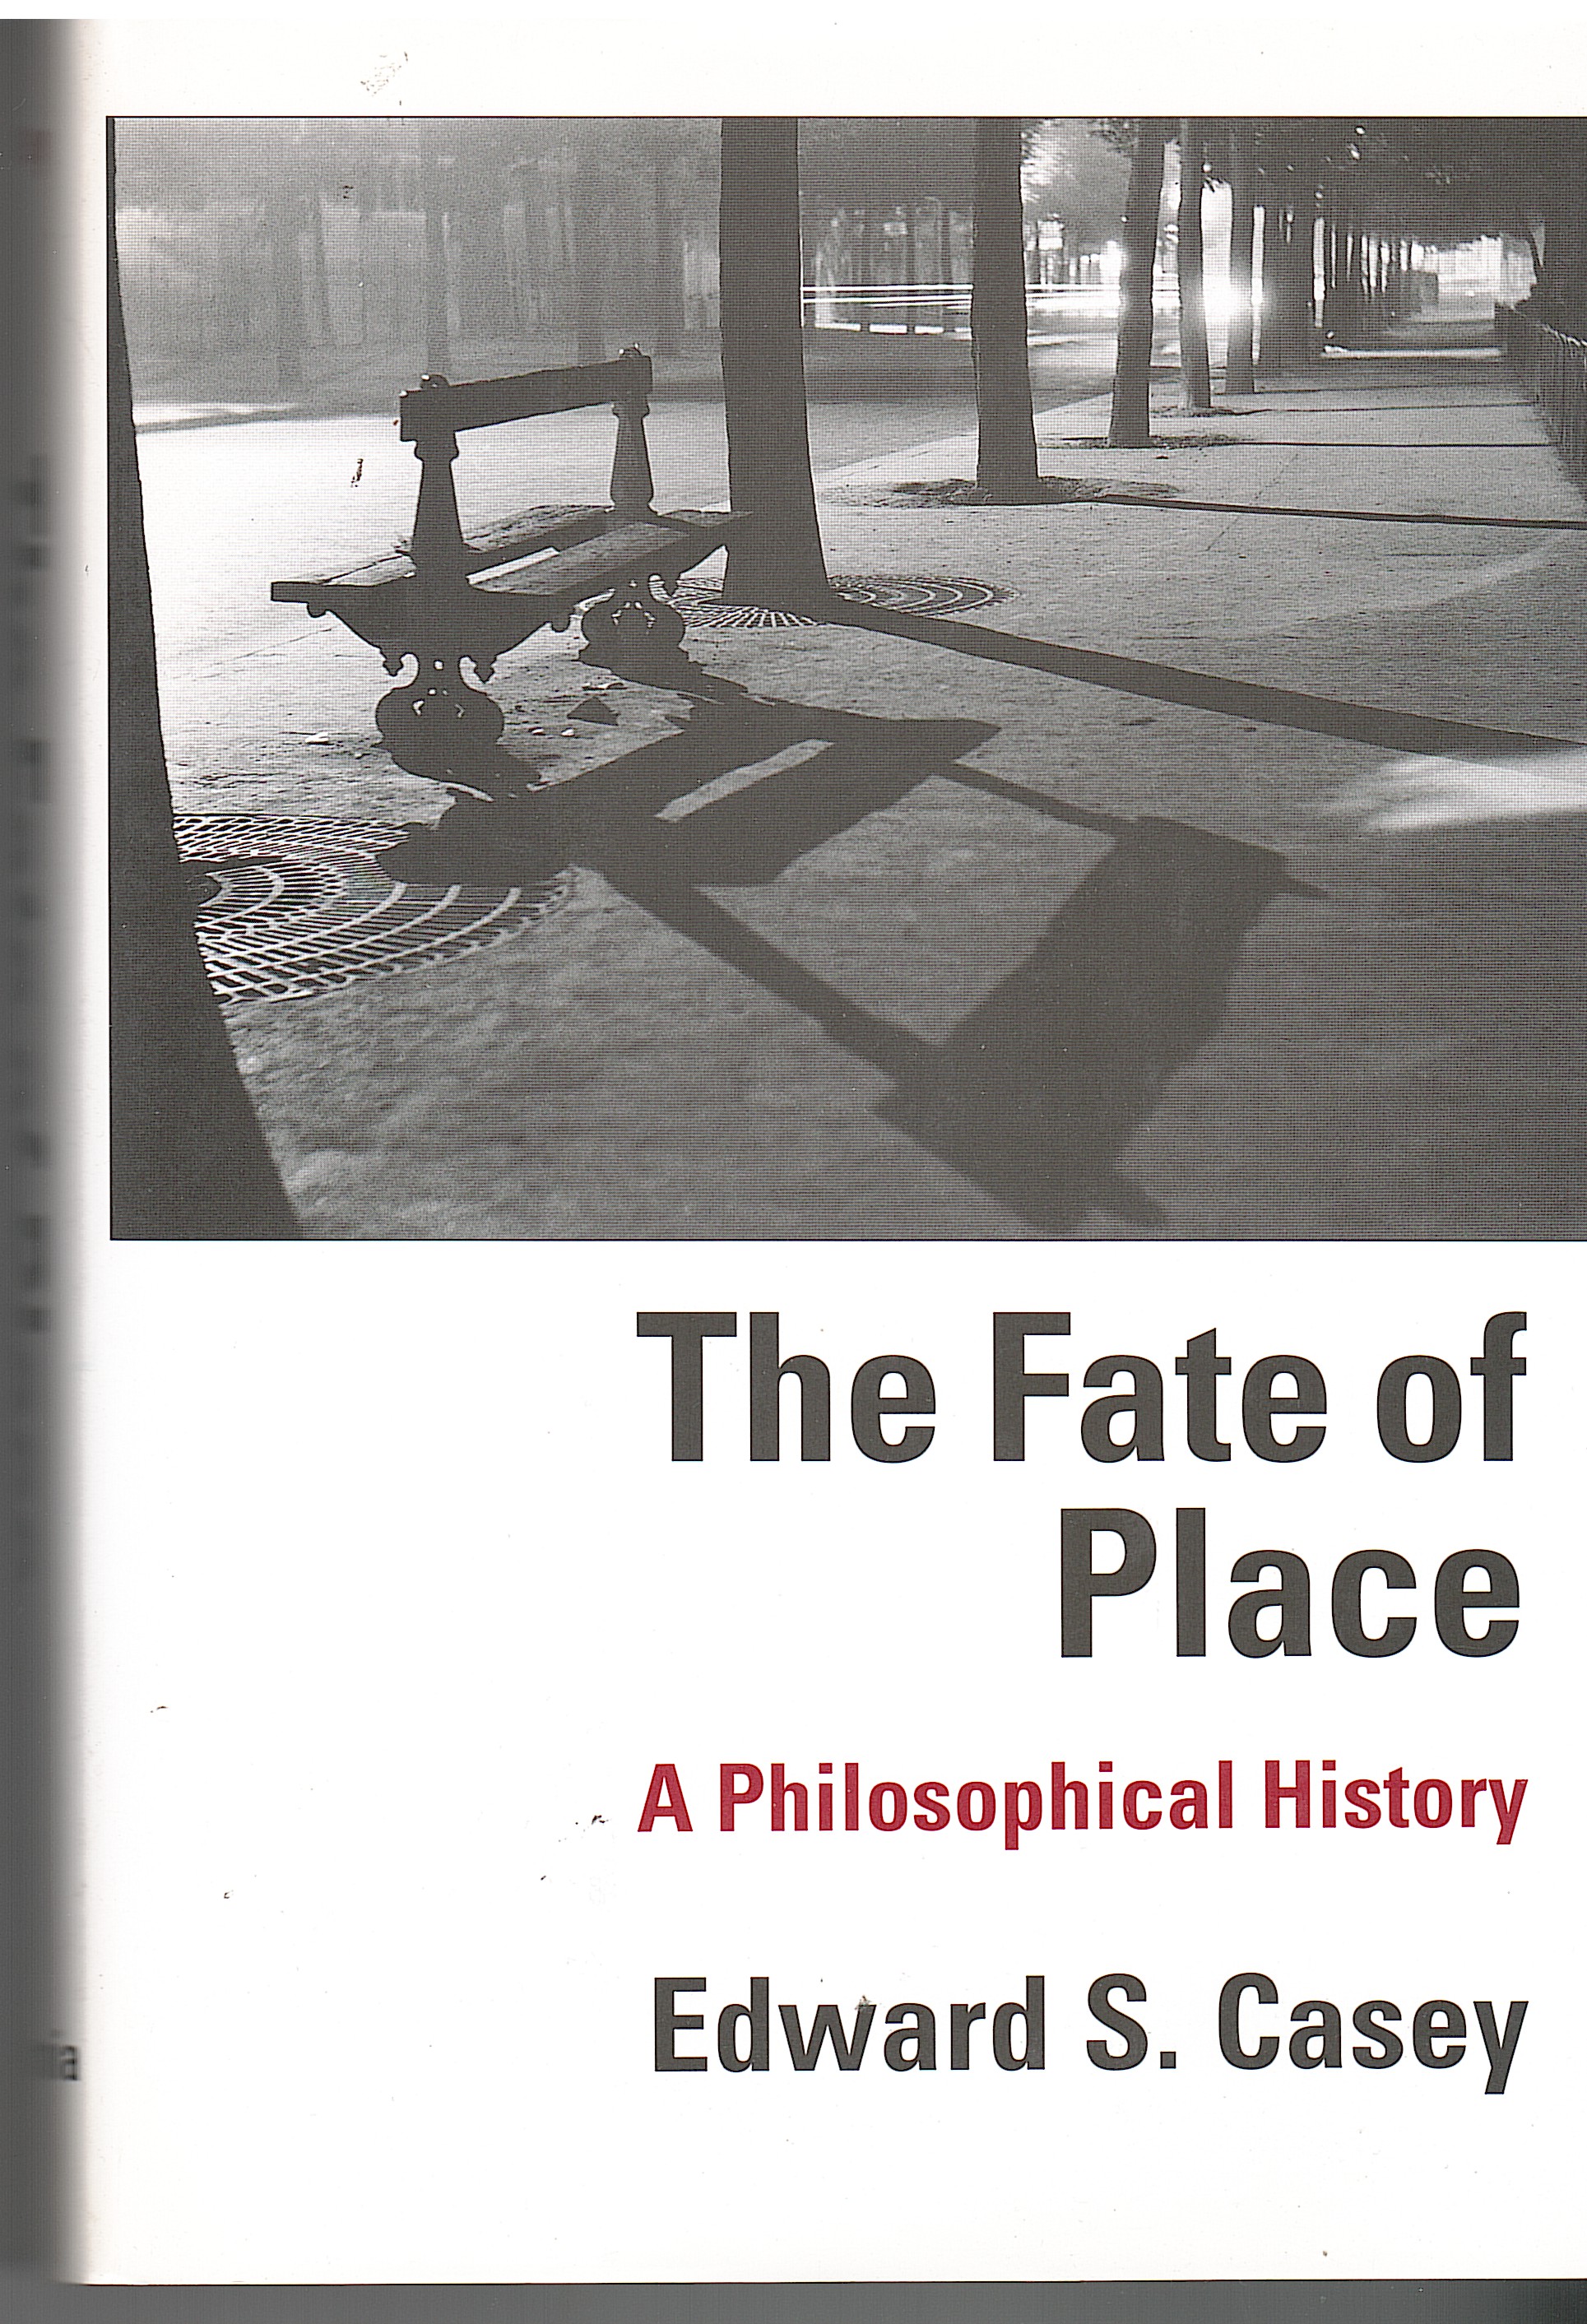 THE FATE OF PLACE, A PHILOSOPHICAL HISTORY